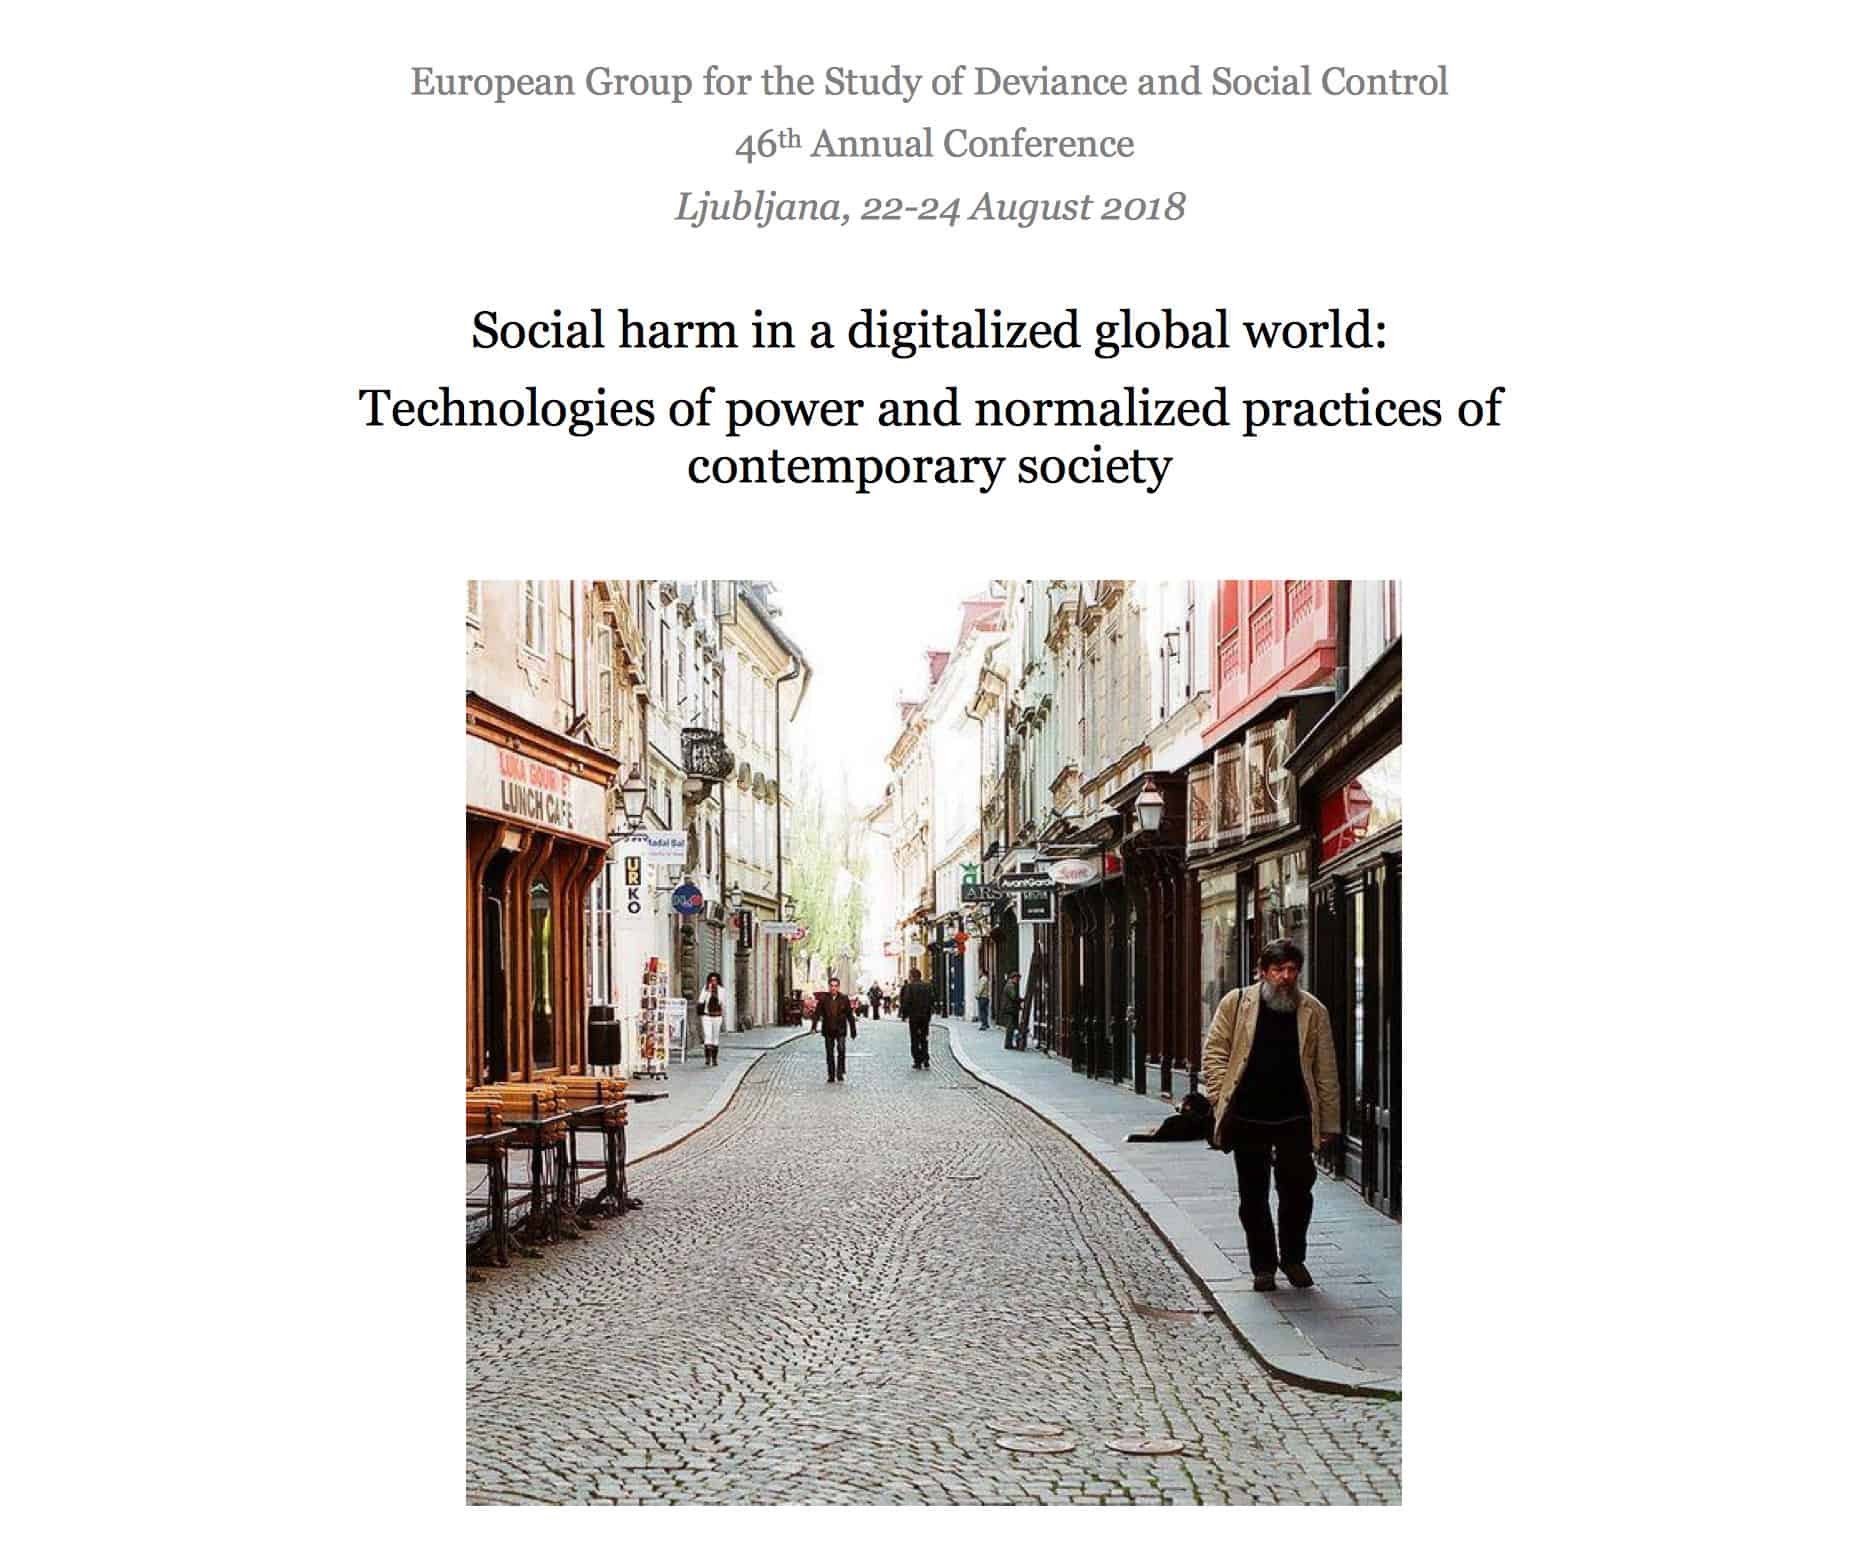 European Group for the Study of Deviance and Social Control: 46th Annual Conference, Ljubljana 2018. Programme booklet